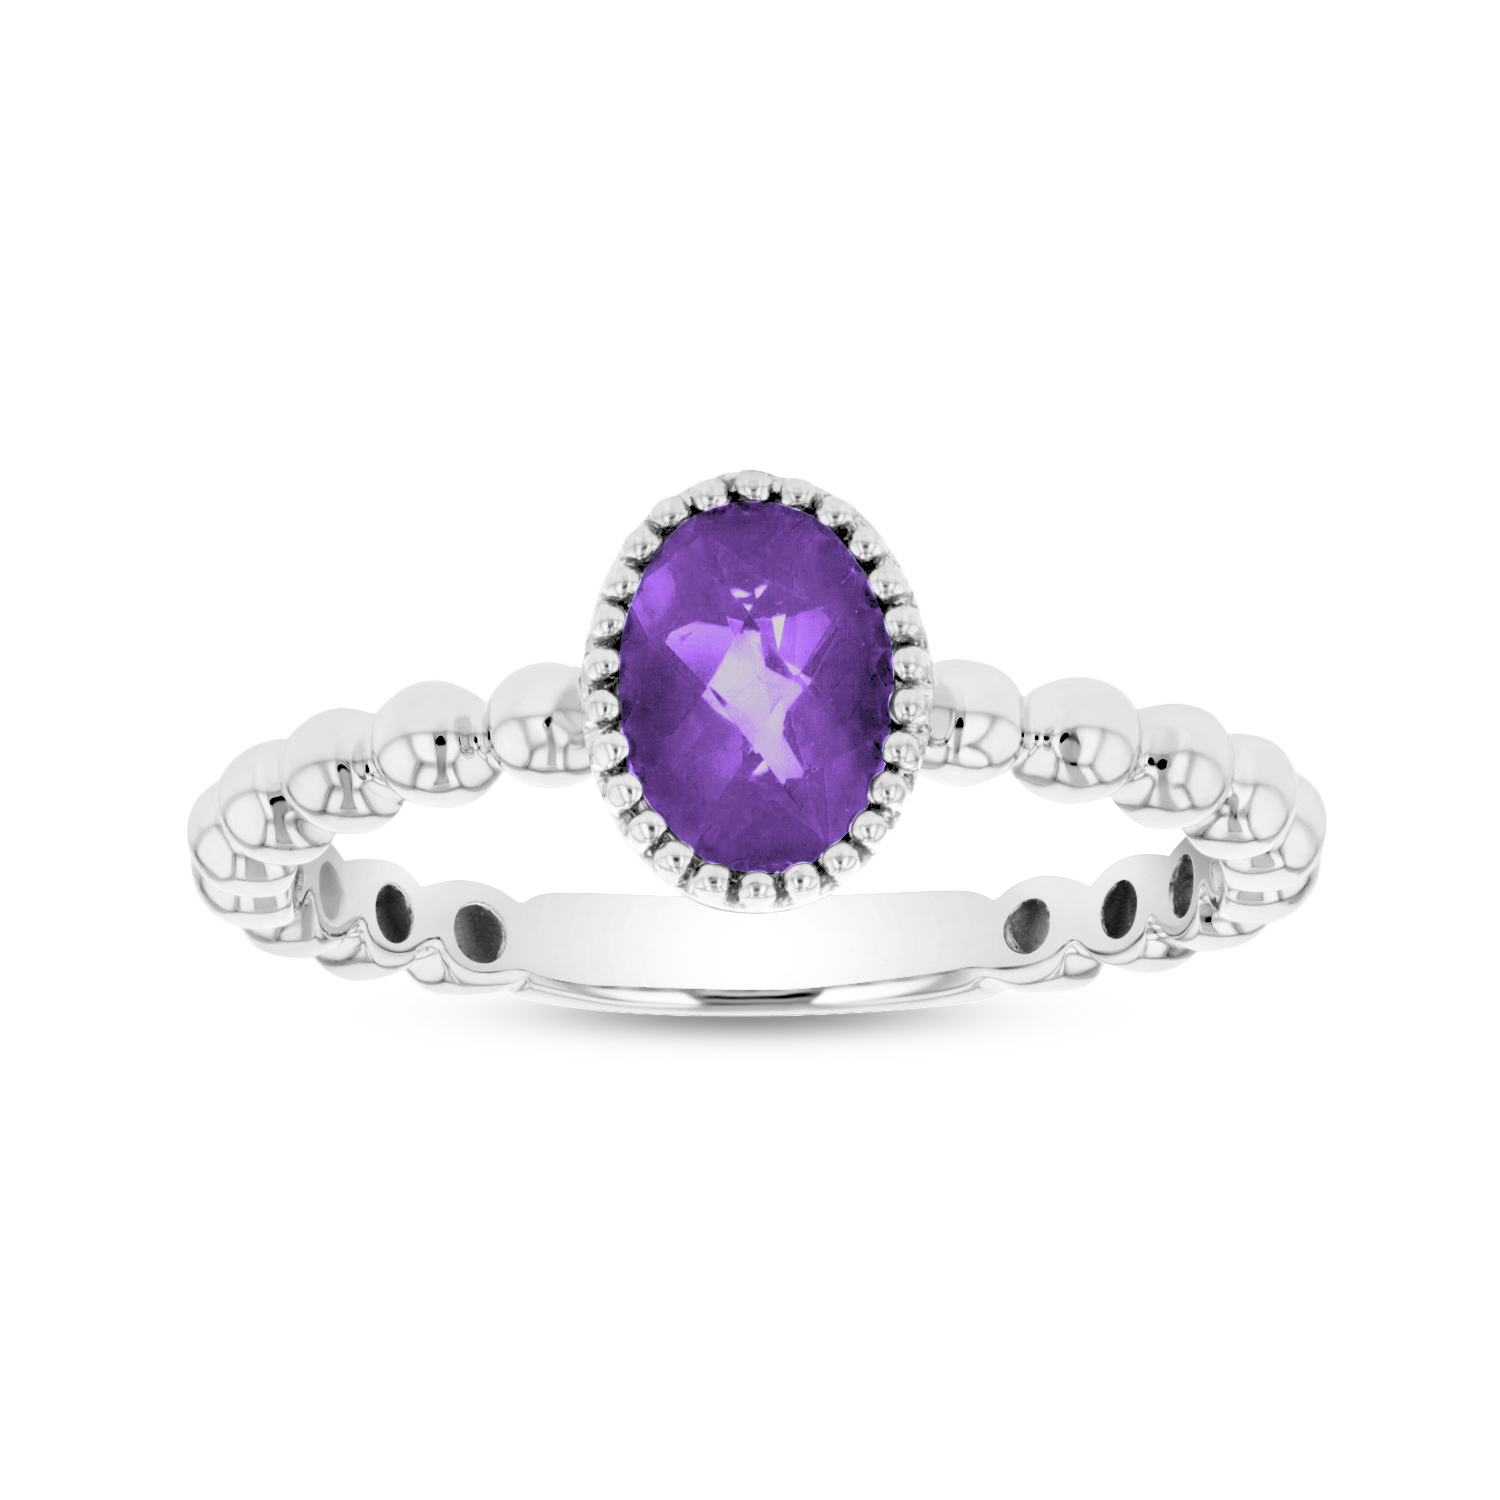 View 7x5mm Oval Amethyst Ring in 14k Gold